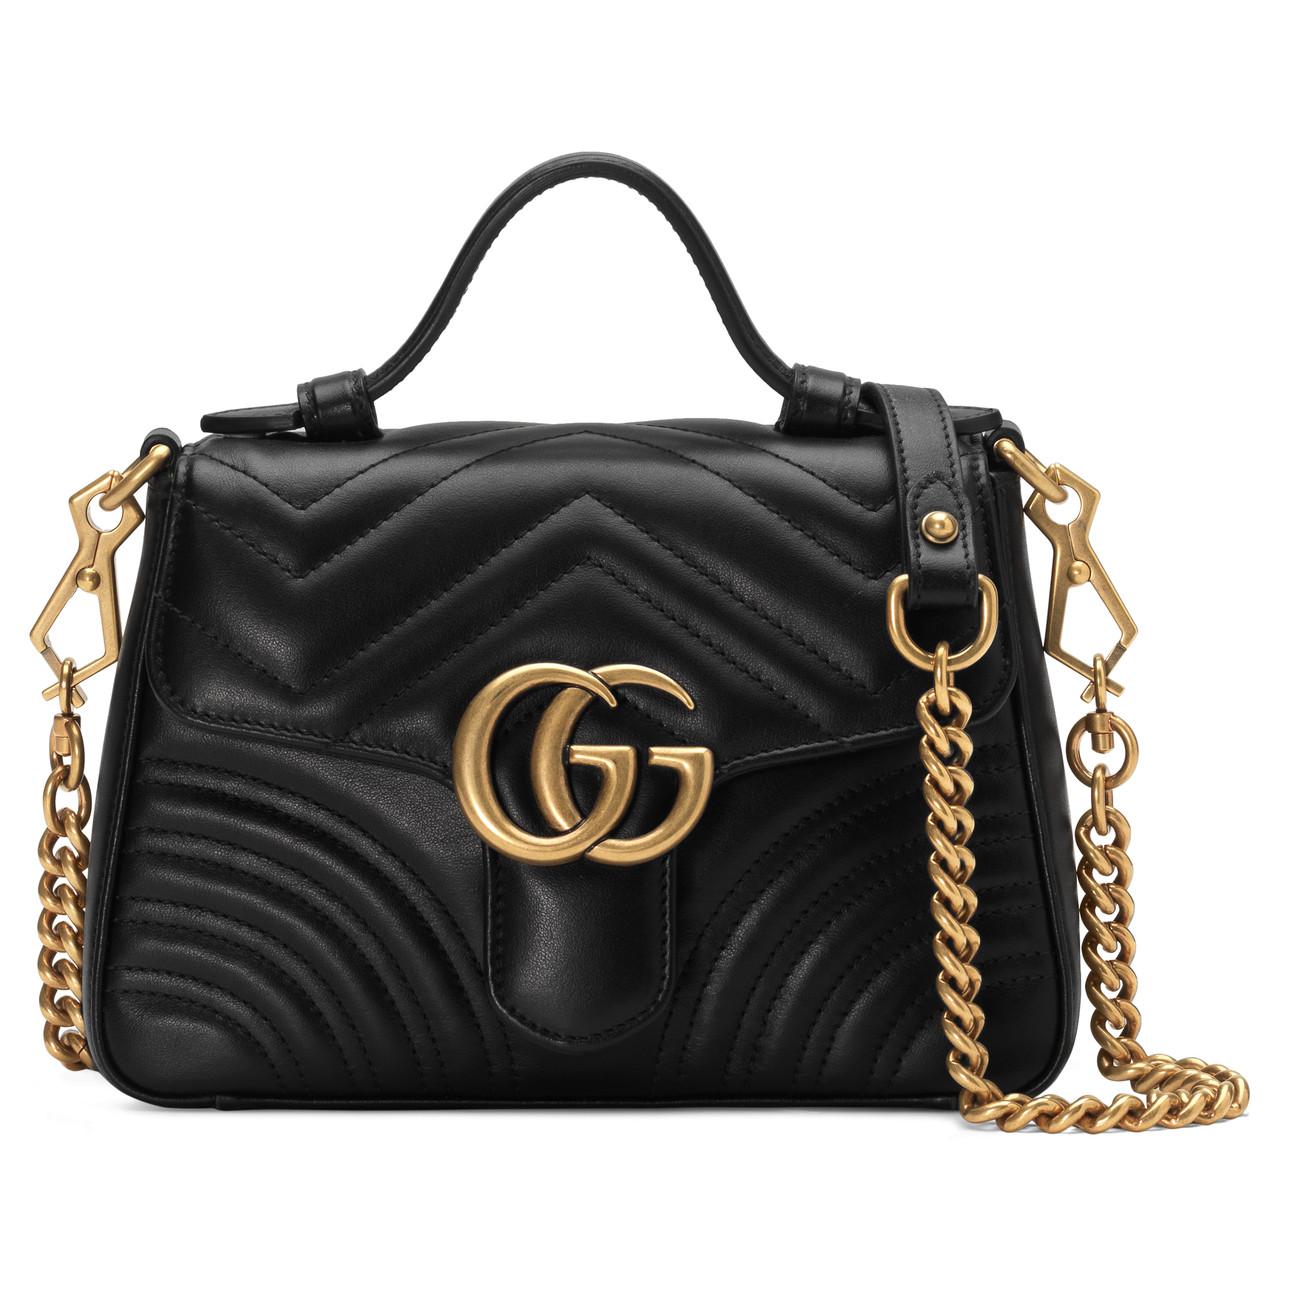 Lyst Gucci  GG Marmont  Mini Top  Handle  Bag in Black